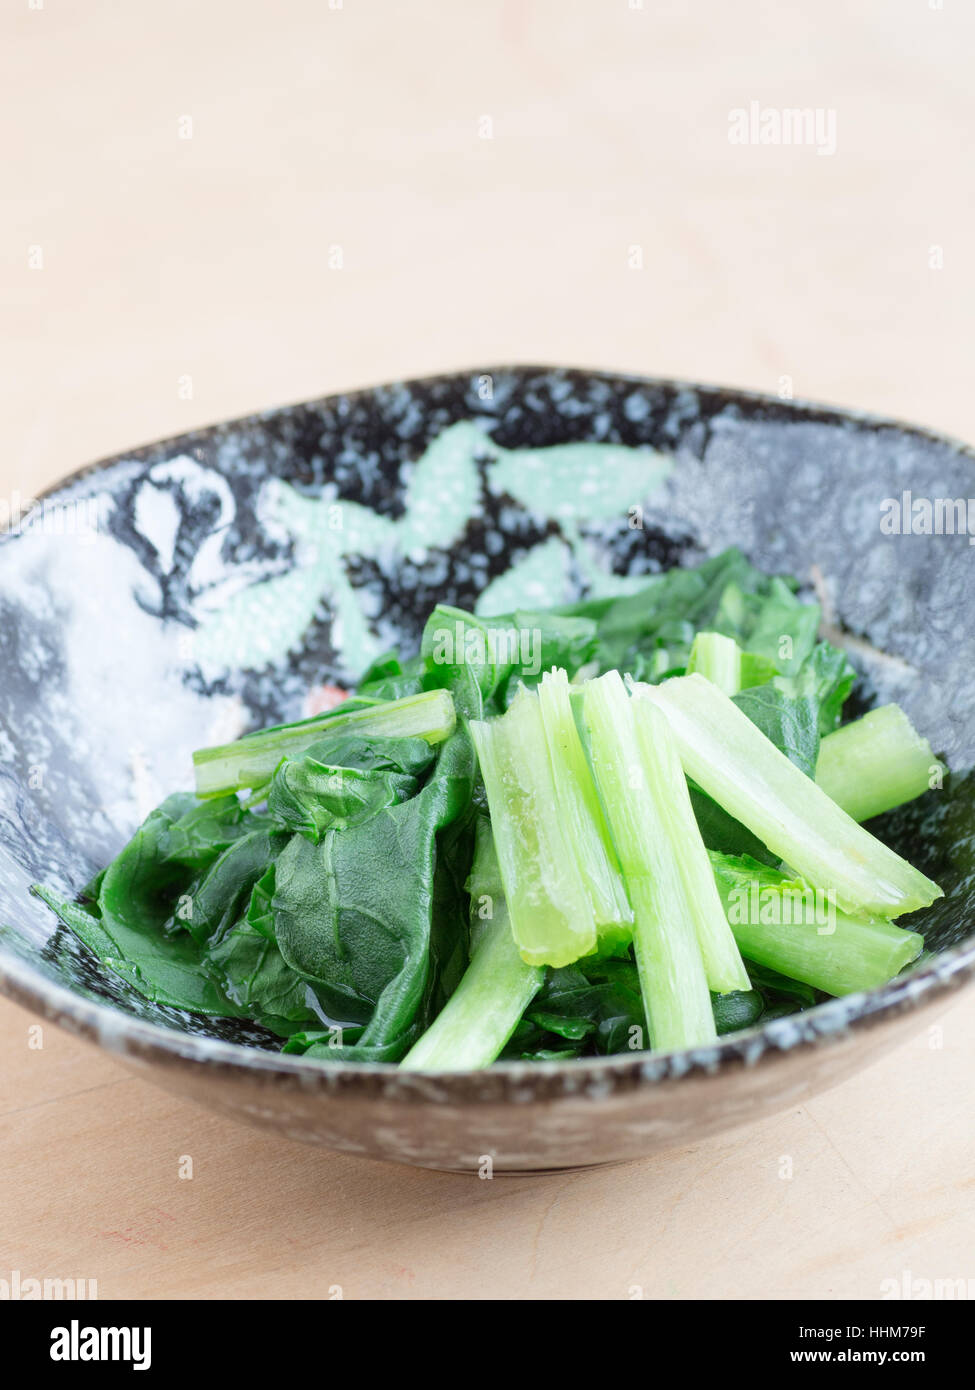 Japanese cuisine, boiled spinach in the bowl Stock Photo